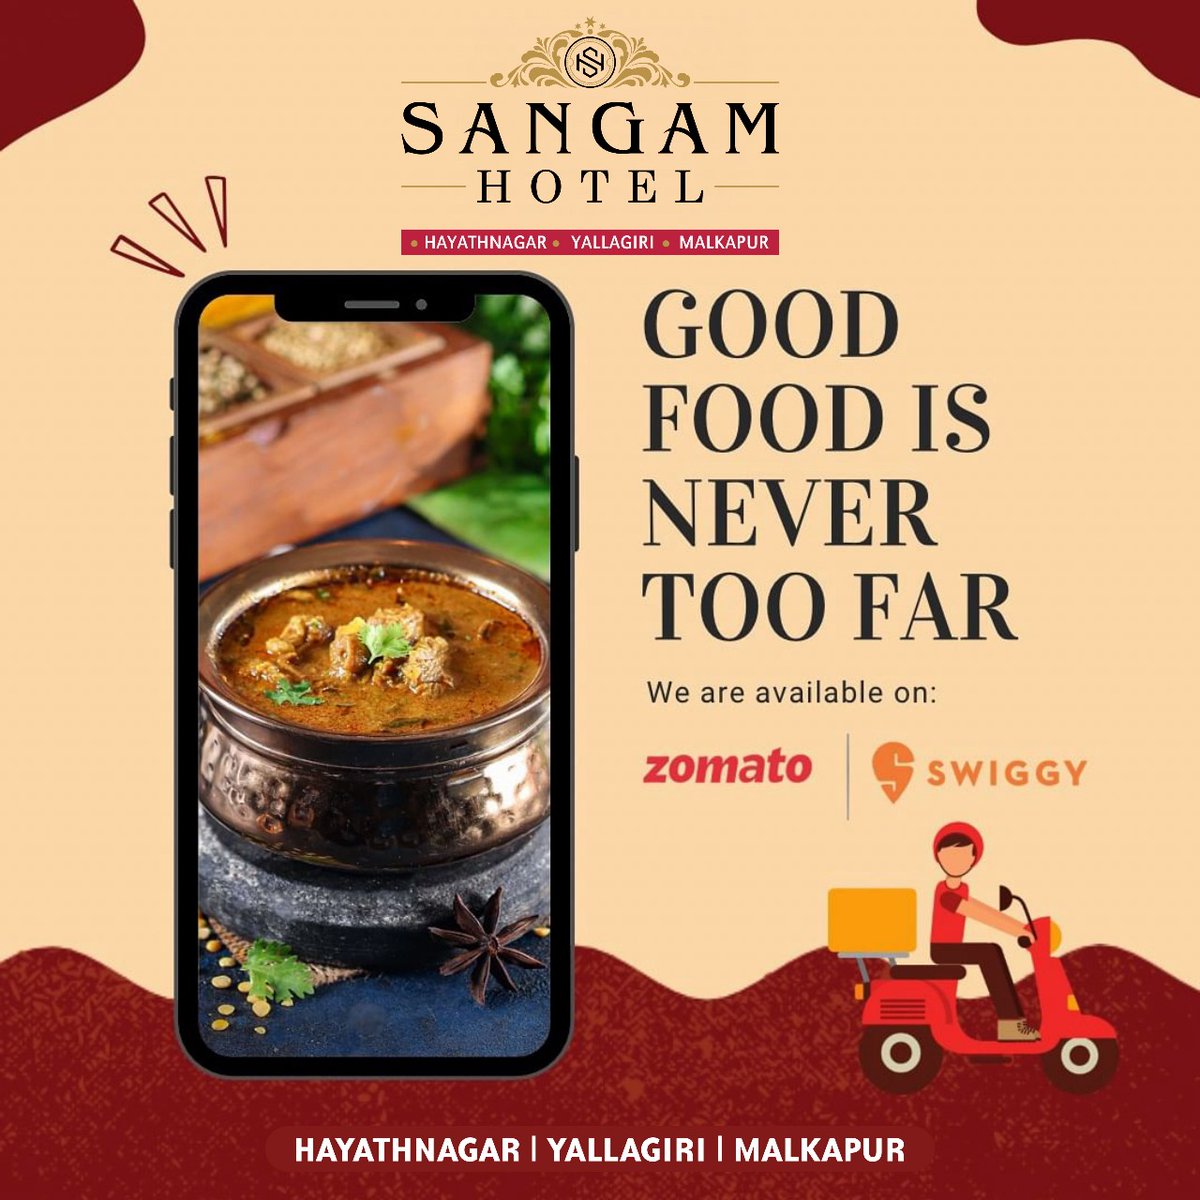 Good Food is never too far,We are available on Zomato & Swiggy!!! @Sangamhotelsma

#fooddelivery #food #delivery #foodie #foodporn #fooddeliveryservice #instafood #foodstagram #foodlover #takeaway #homedelivery #foodphotography #restaurant #lunch #stayhome #delicious